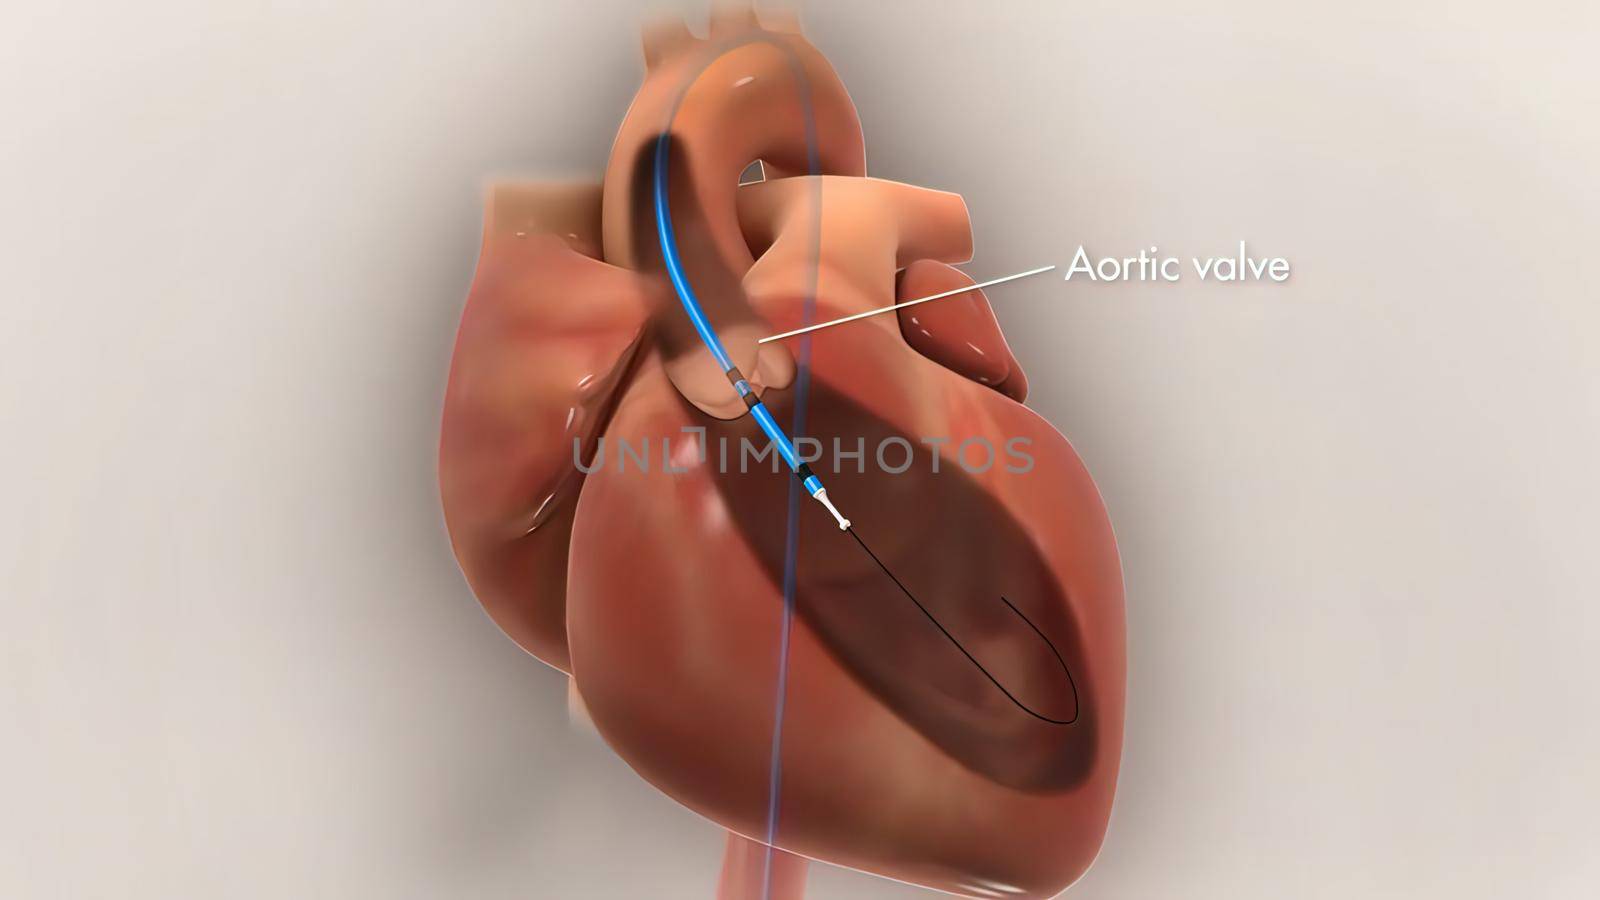 heart stent insertion process by creativepic